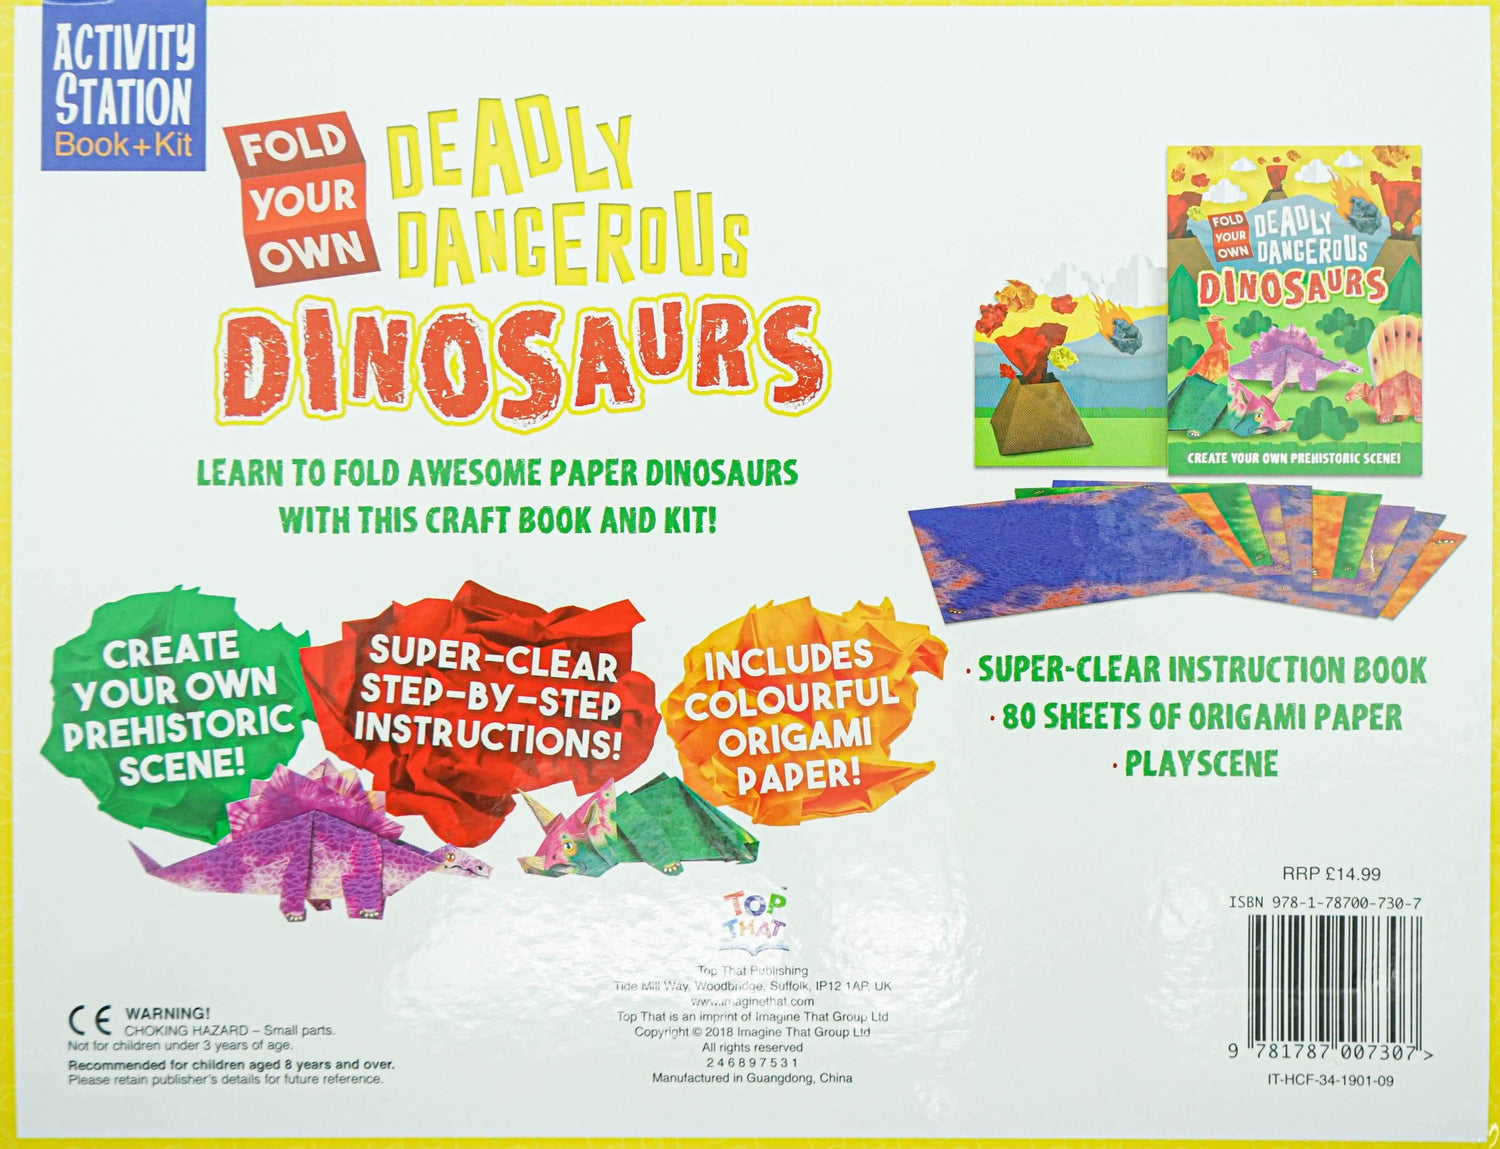 Activity Station: Fold Your Own Deadly Dangerous Dinosaurs